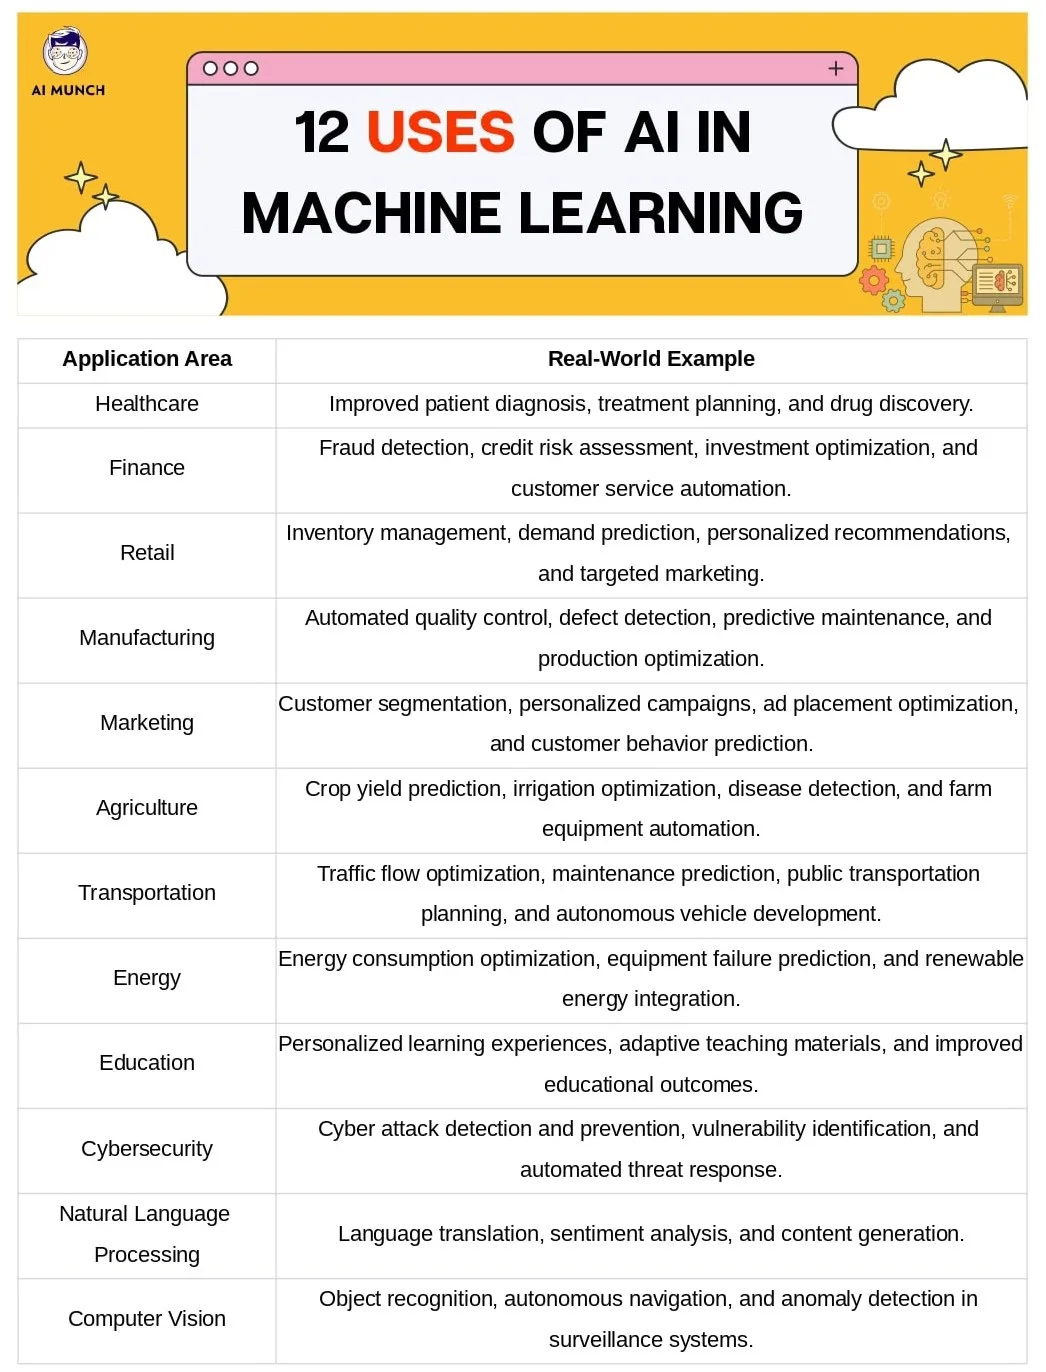 What are the real world application examples of artificial intelligence AI in Machine Learning (ML)